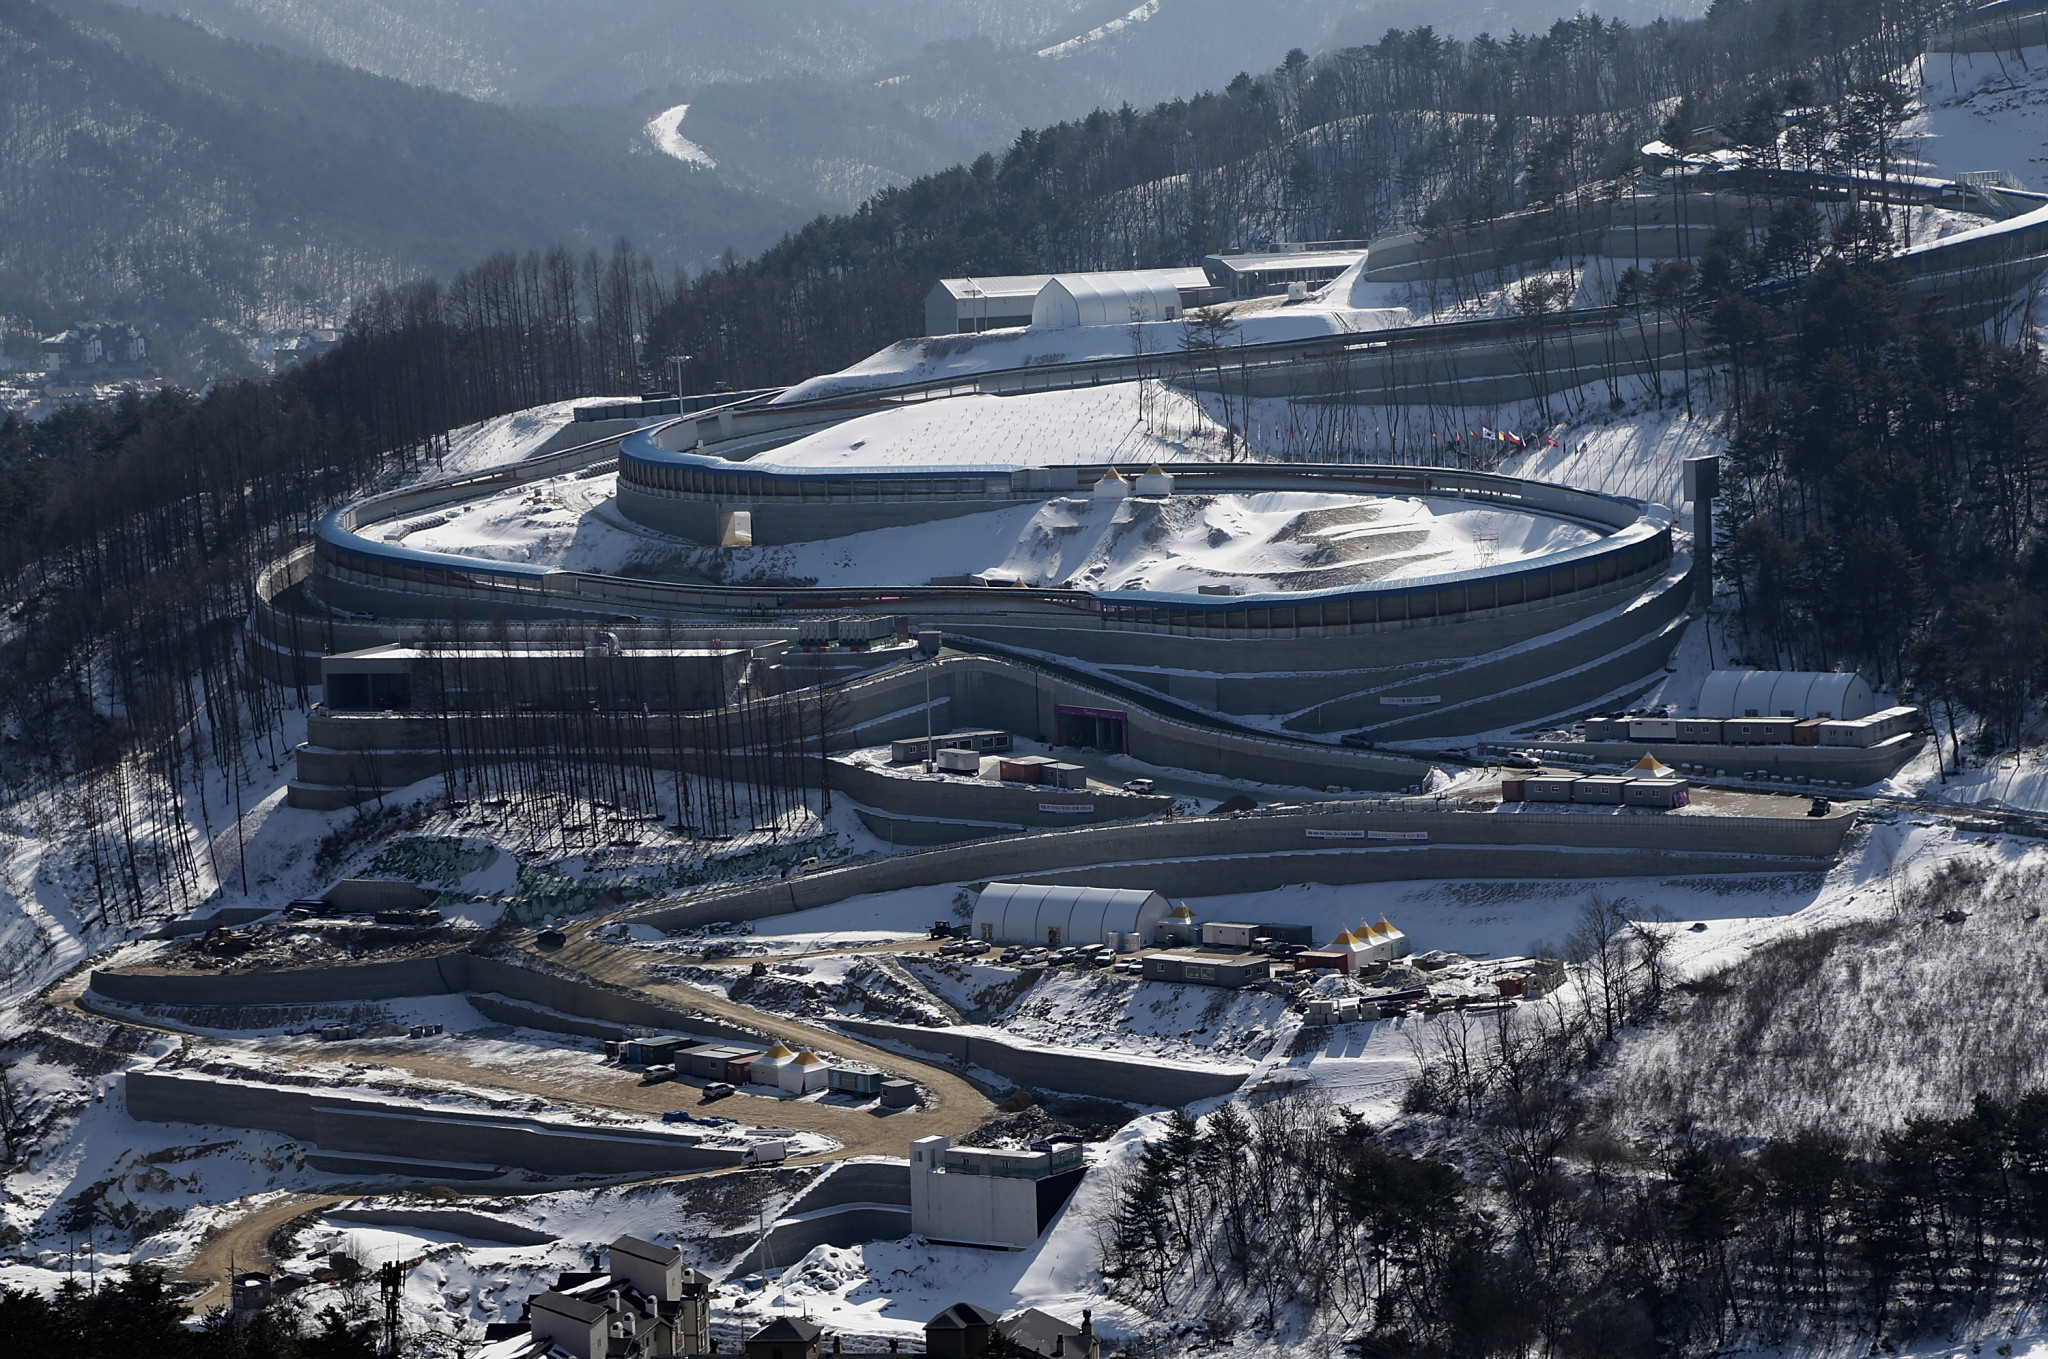 There were initial teething problems at the Pyeongchang 2018 sliding venue ©Getty Images